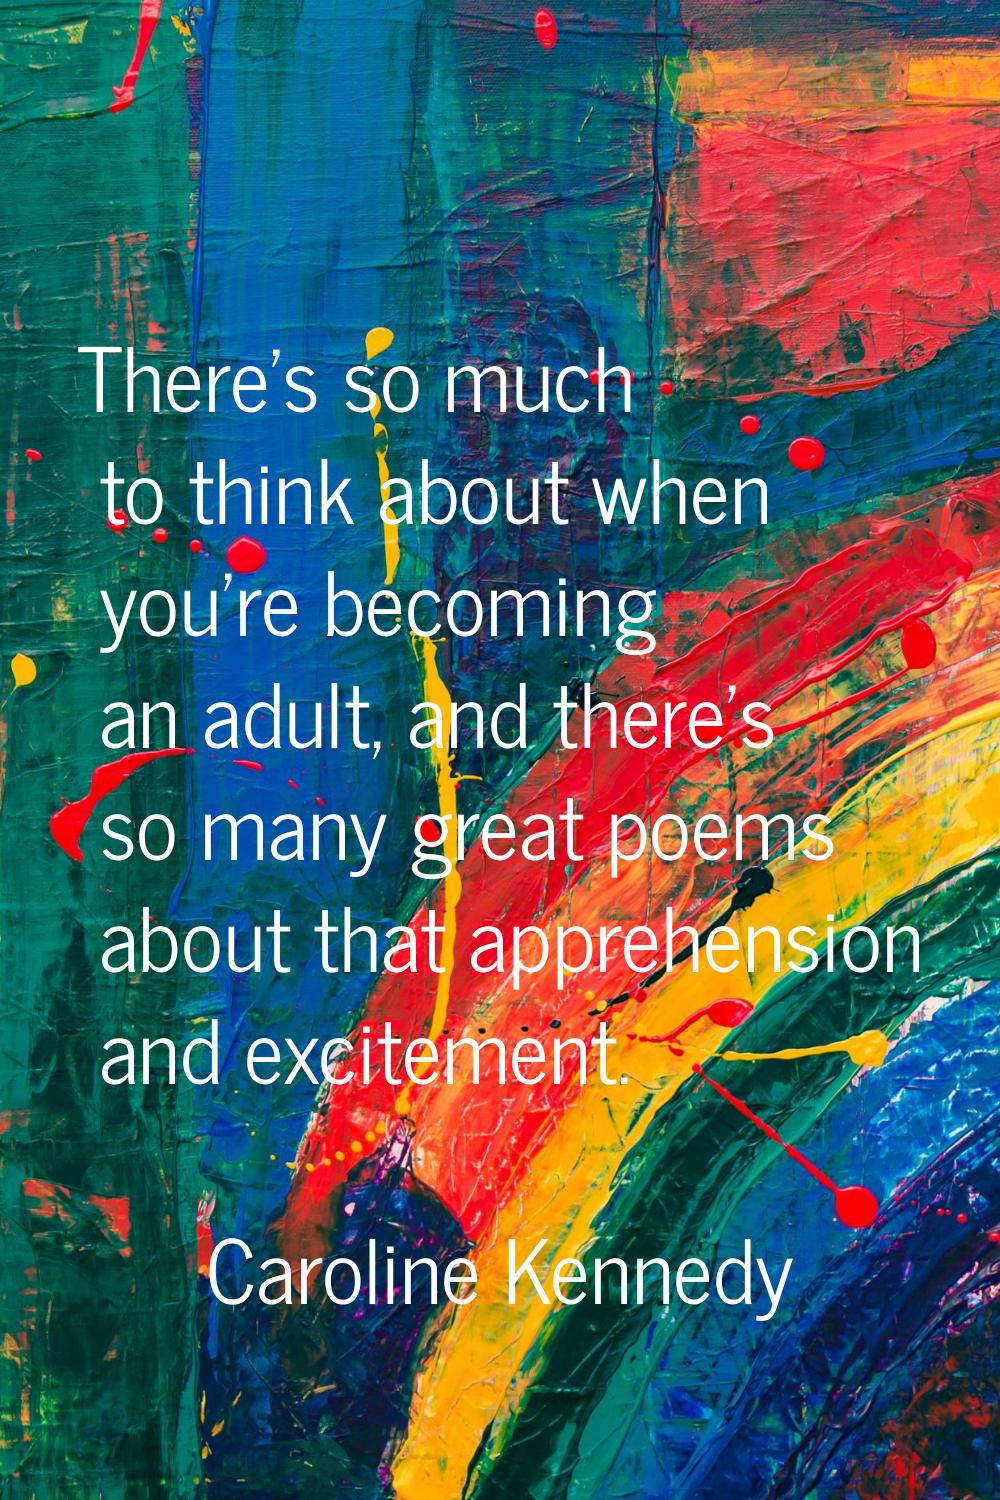 There's so much to think about when you're becoming an adult, and there's so many great poems about